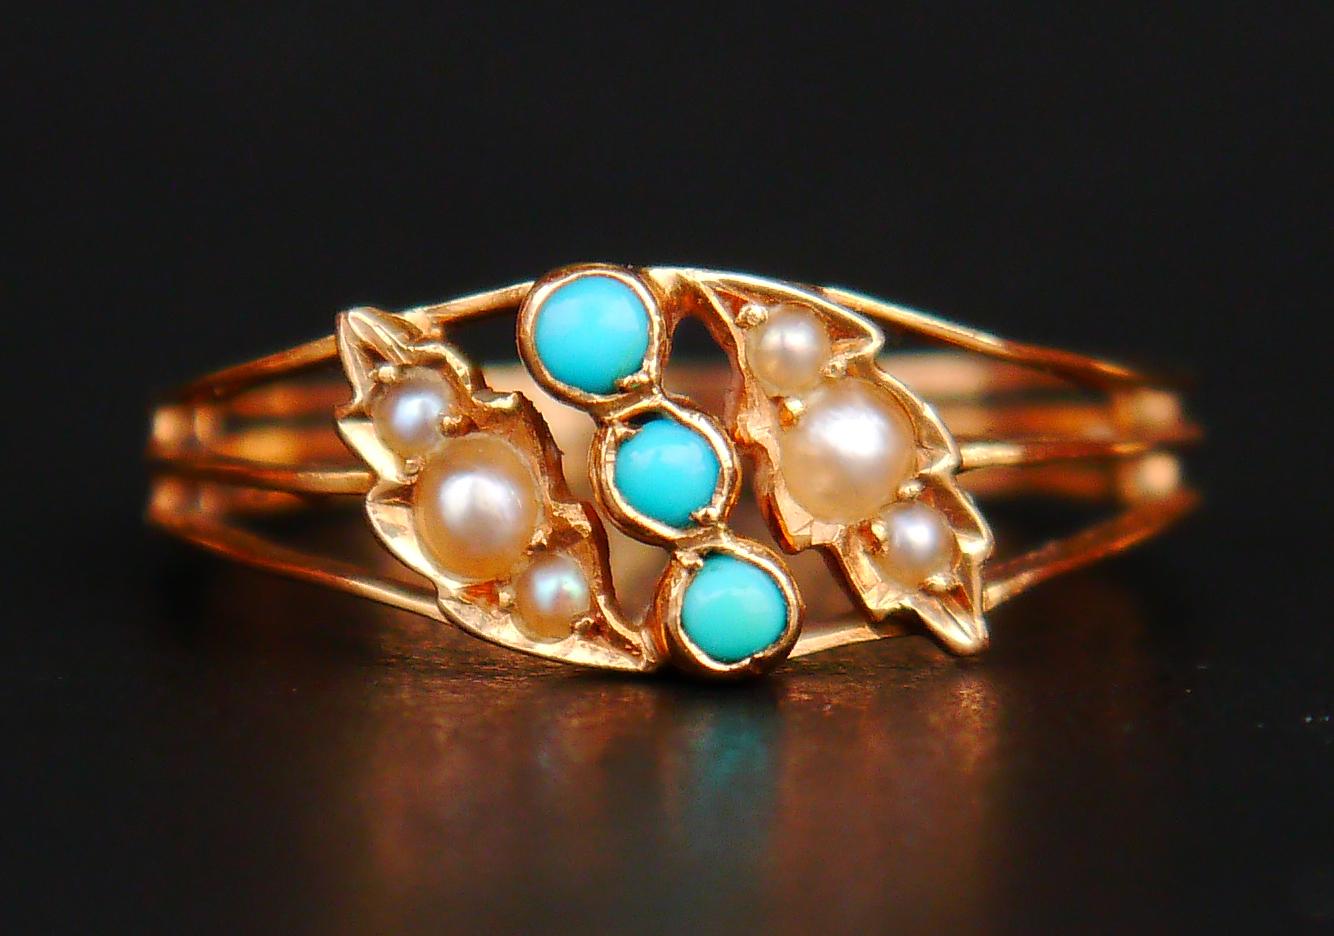 Ring in solid 18K Rose Gold with three size-matching natural Blue Turquoise stones flanked with 6 gradually sized Seed Pearls set into leaf-shaped clusters. The backs of the stones are closed.

Swedish ring, all hallmarks except year combination